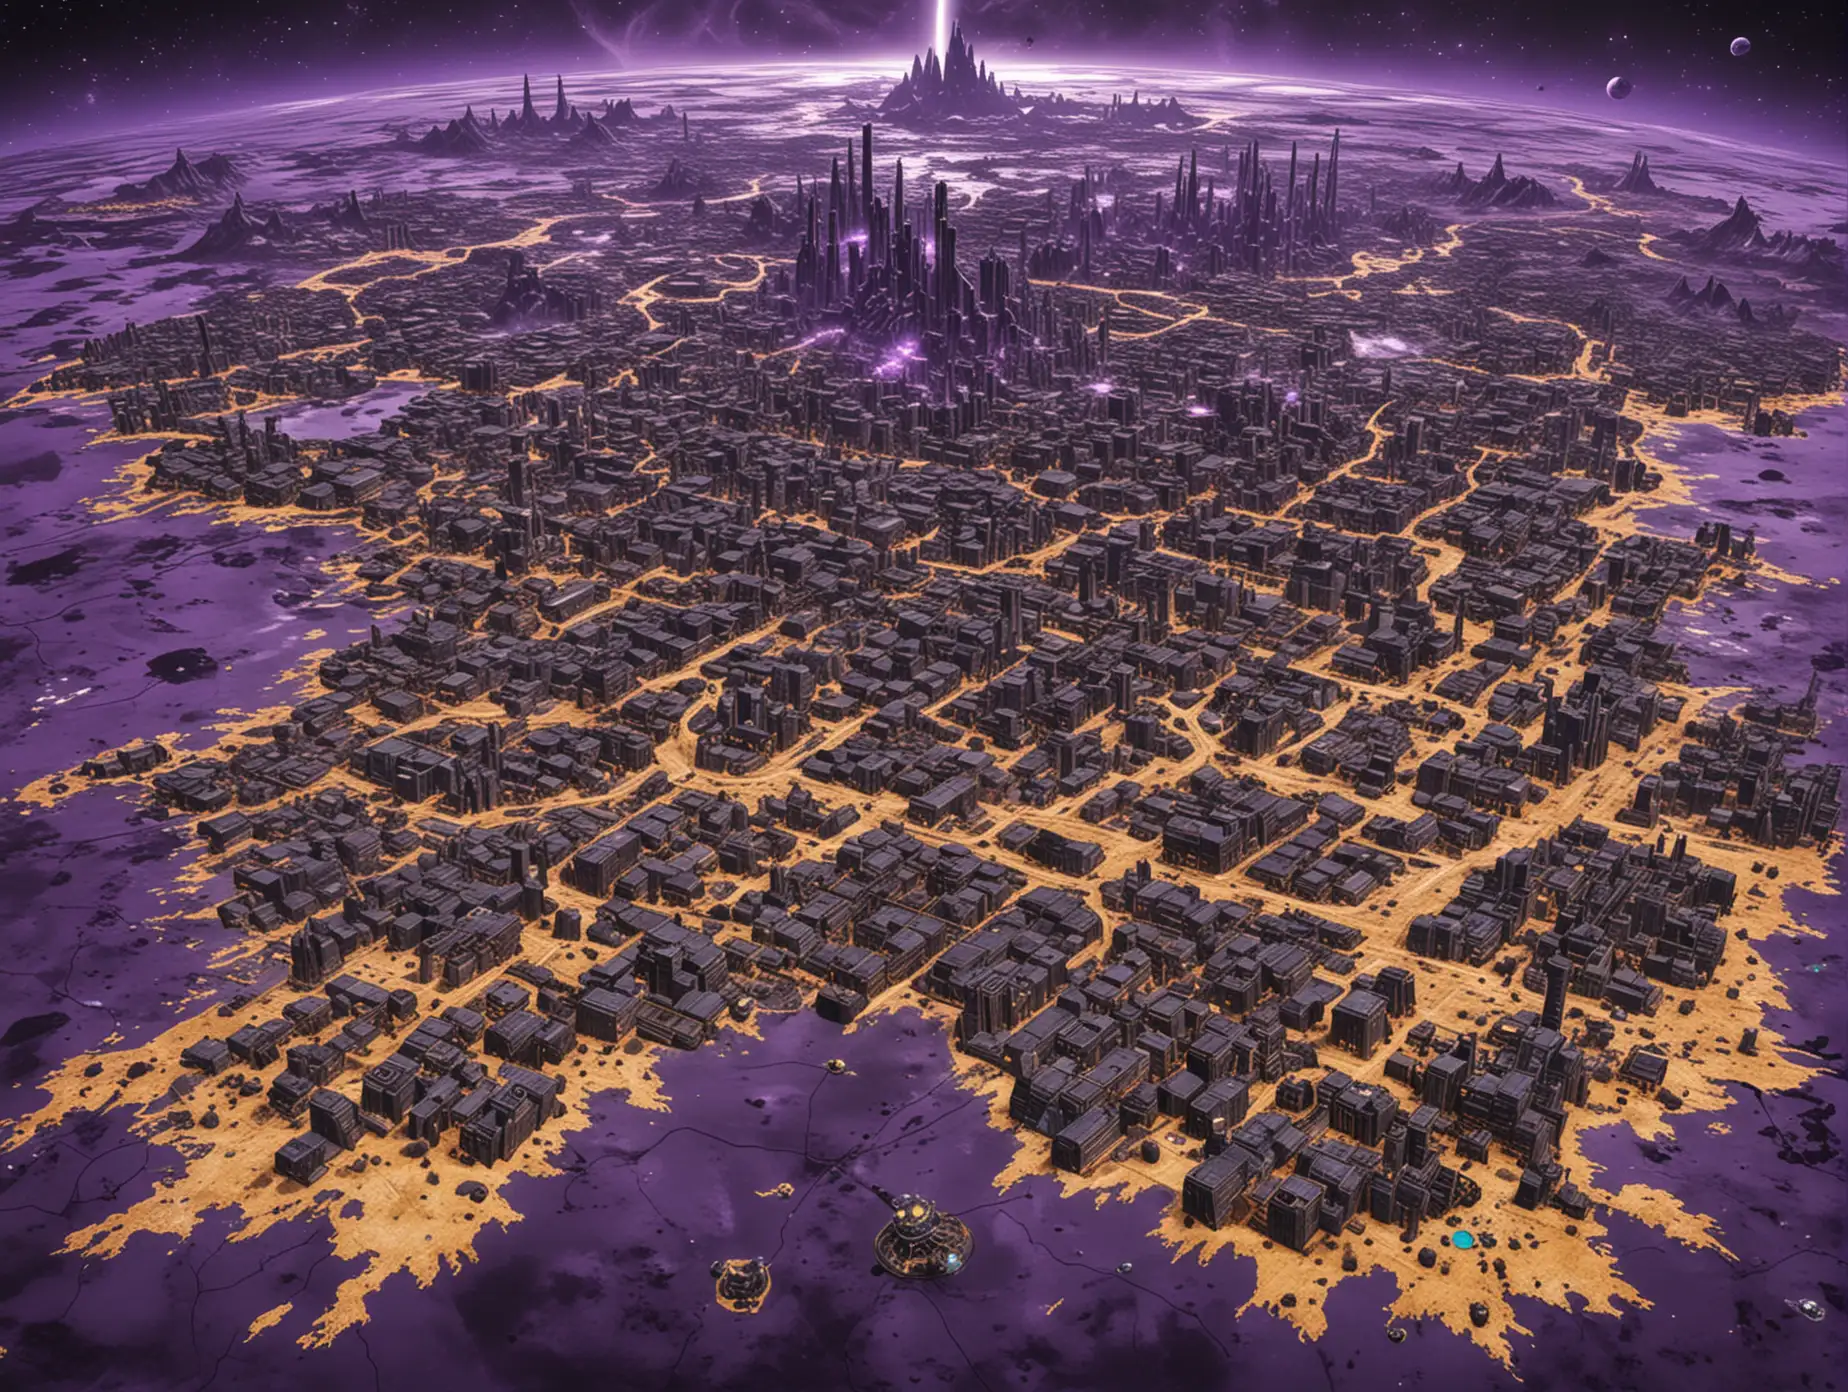 A Very huge abadoned Black-purple Planet's huge map. The map's from the top.
The map's majority is abadoned and extinct, but some (5) abadoned factories, buildings, ore and gold sites can be found on the map.